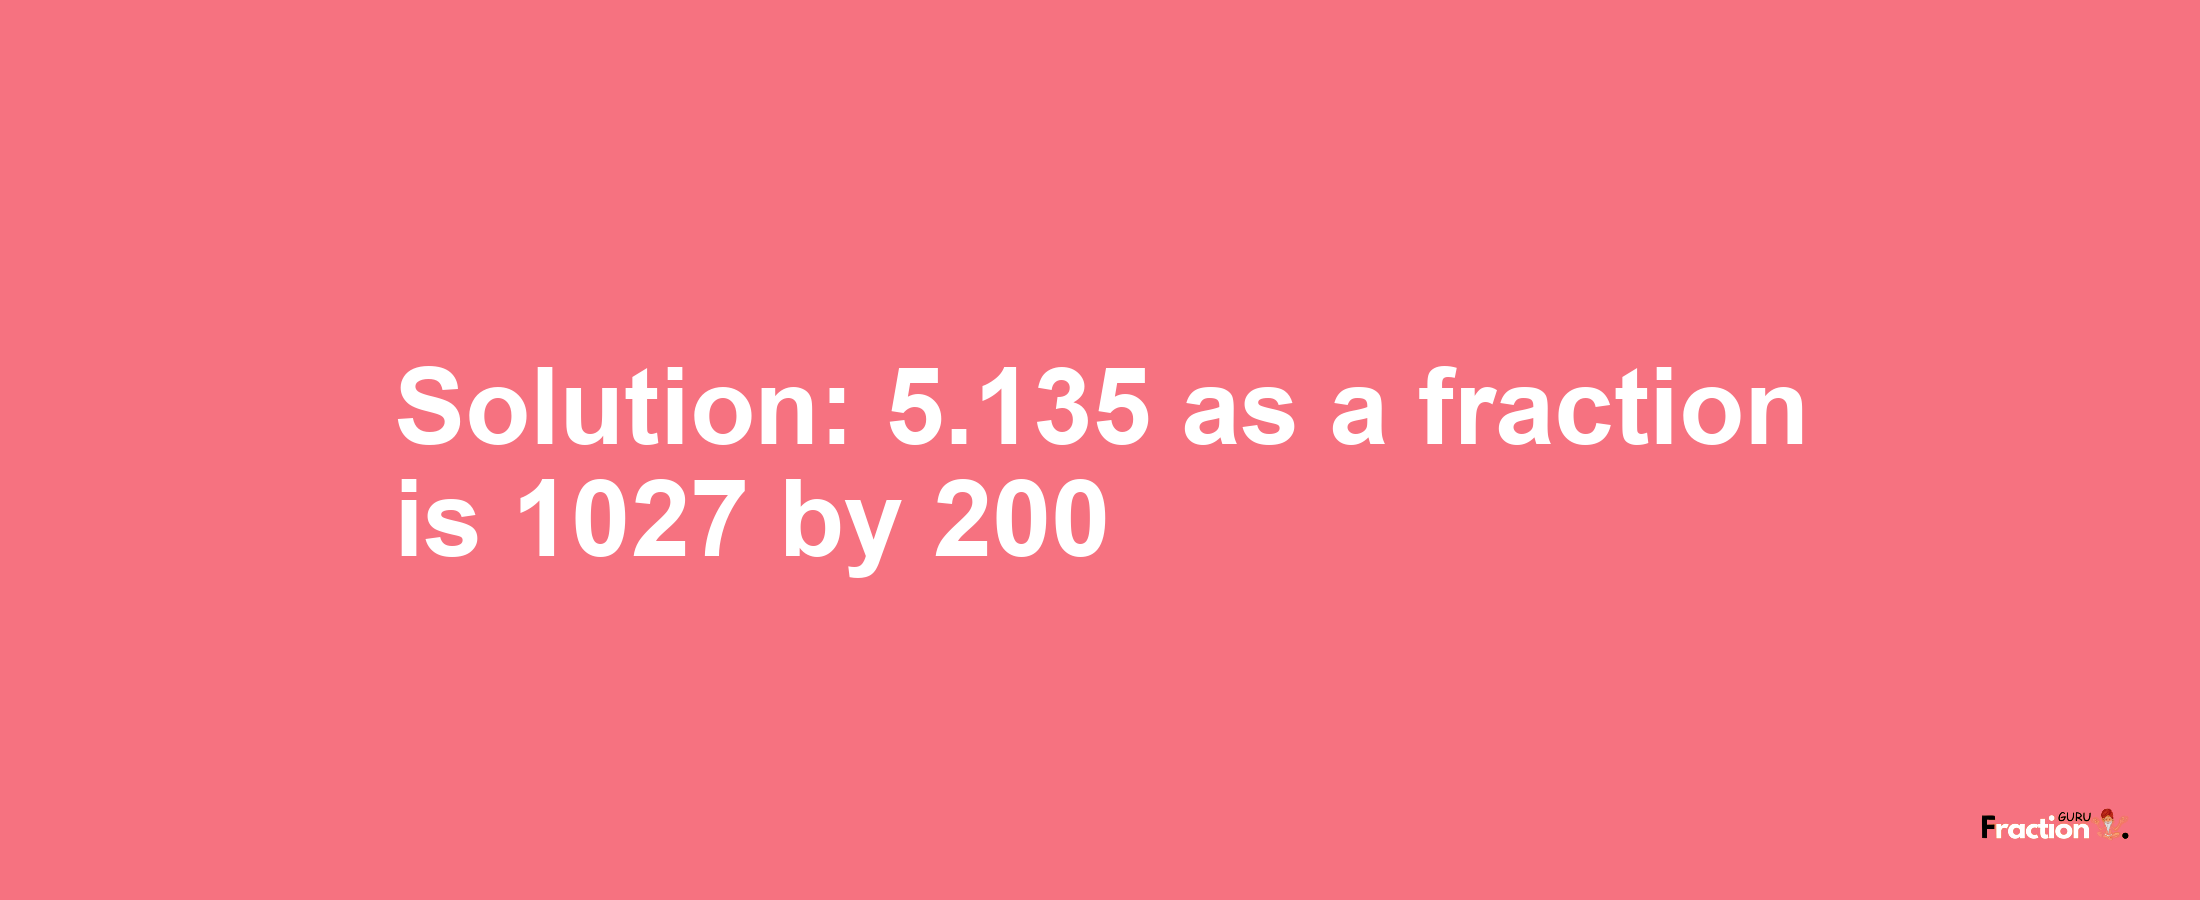 Solution:5.135 as a fraction is 1027/200